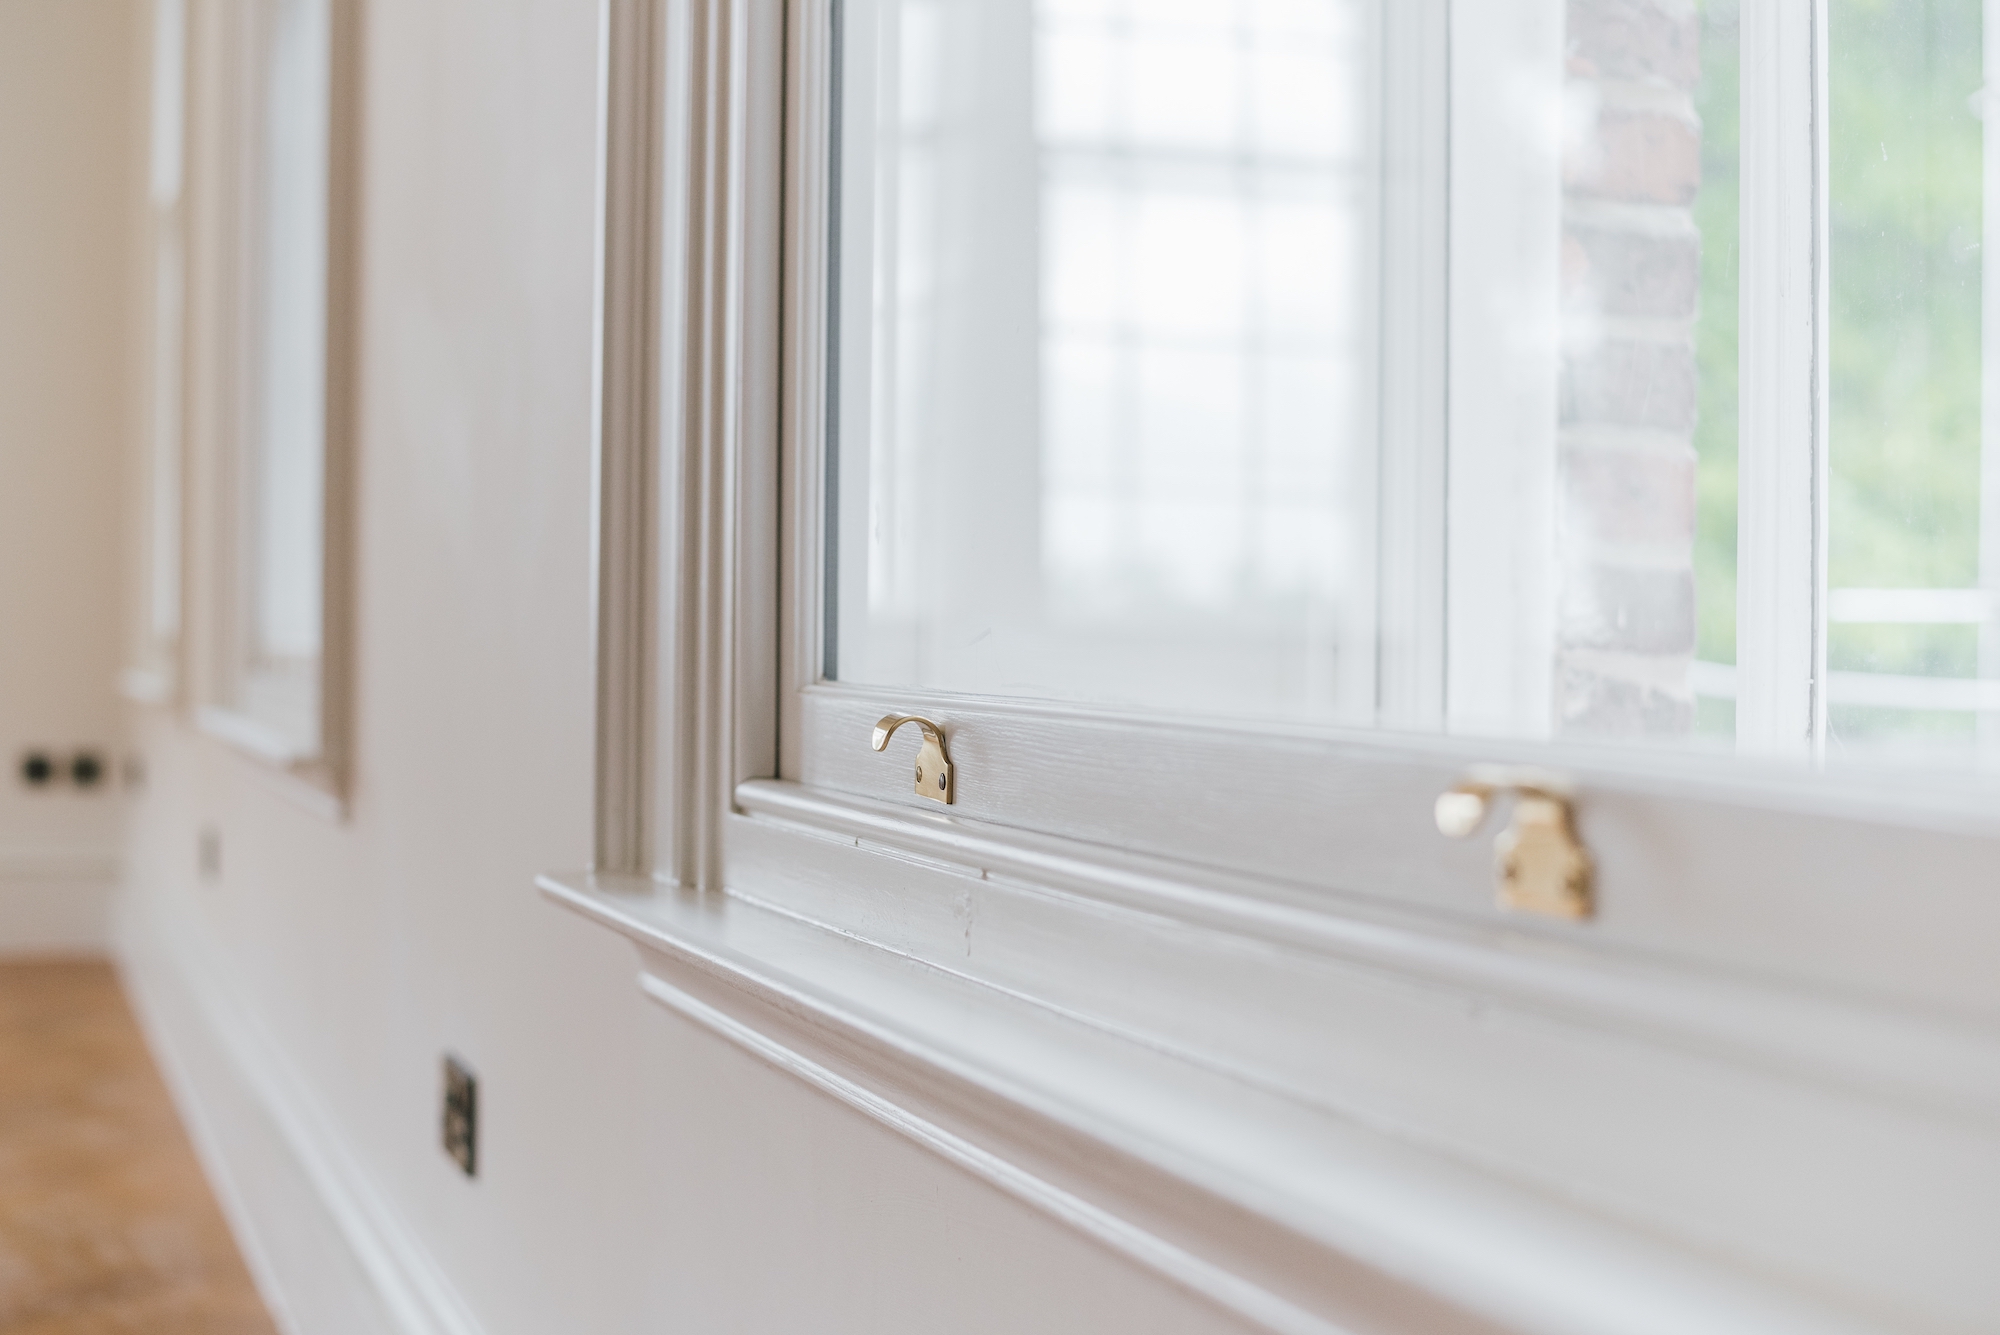 Will Replacing Home Windows Improve Security? (3 Features For Secure Replacement Windows)